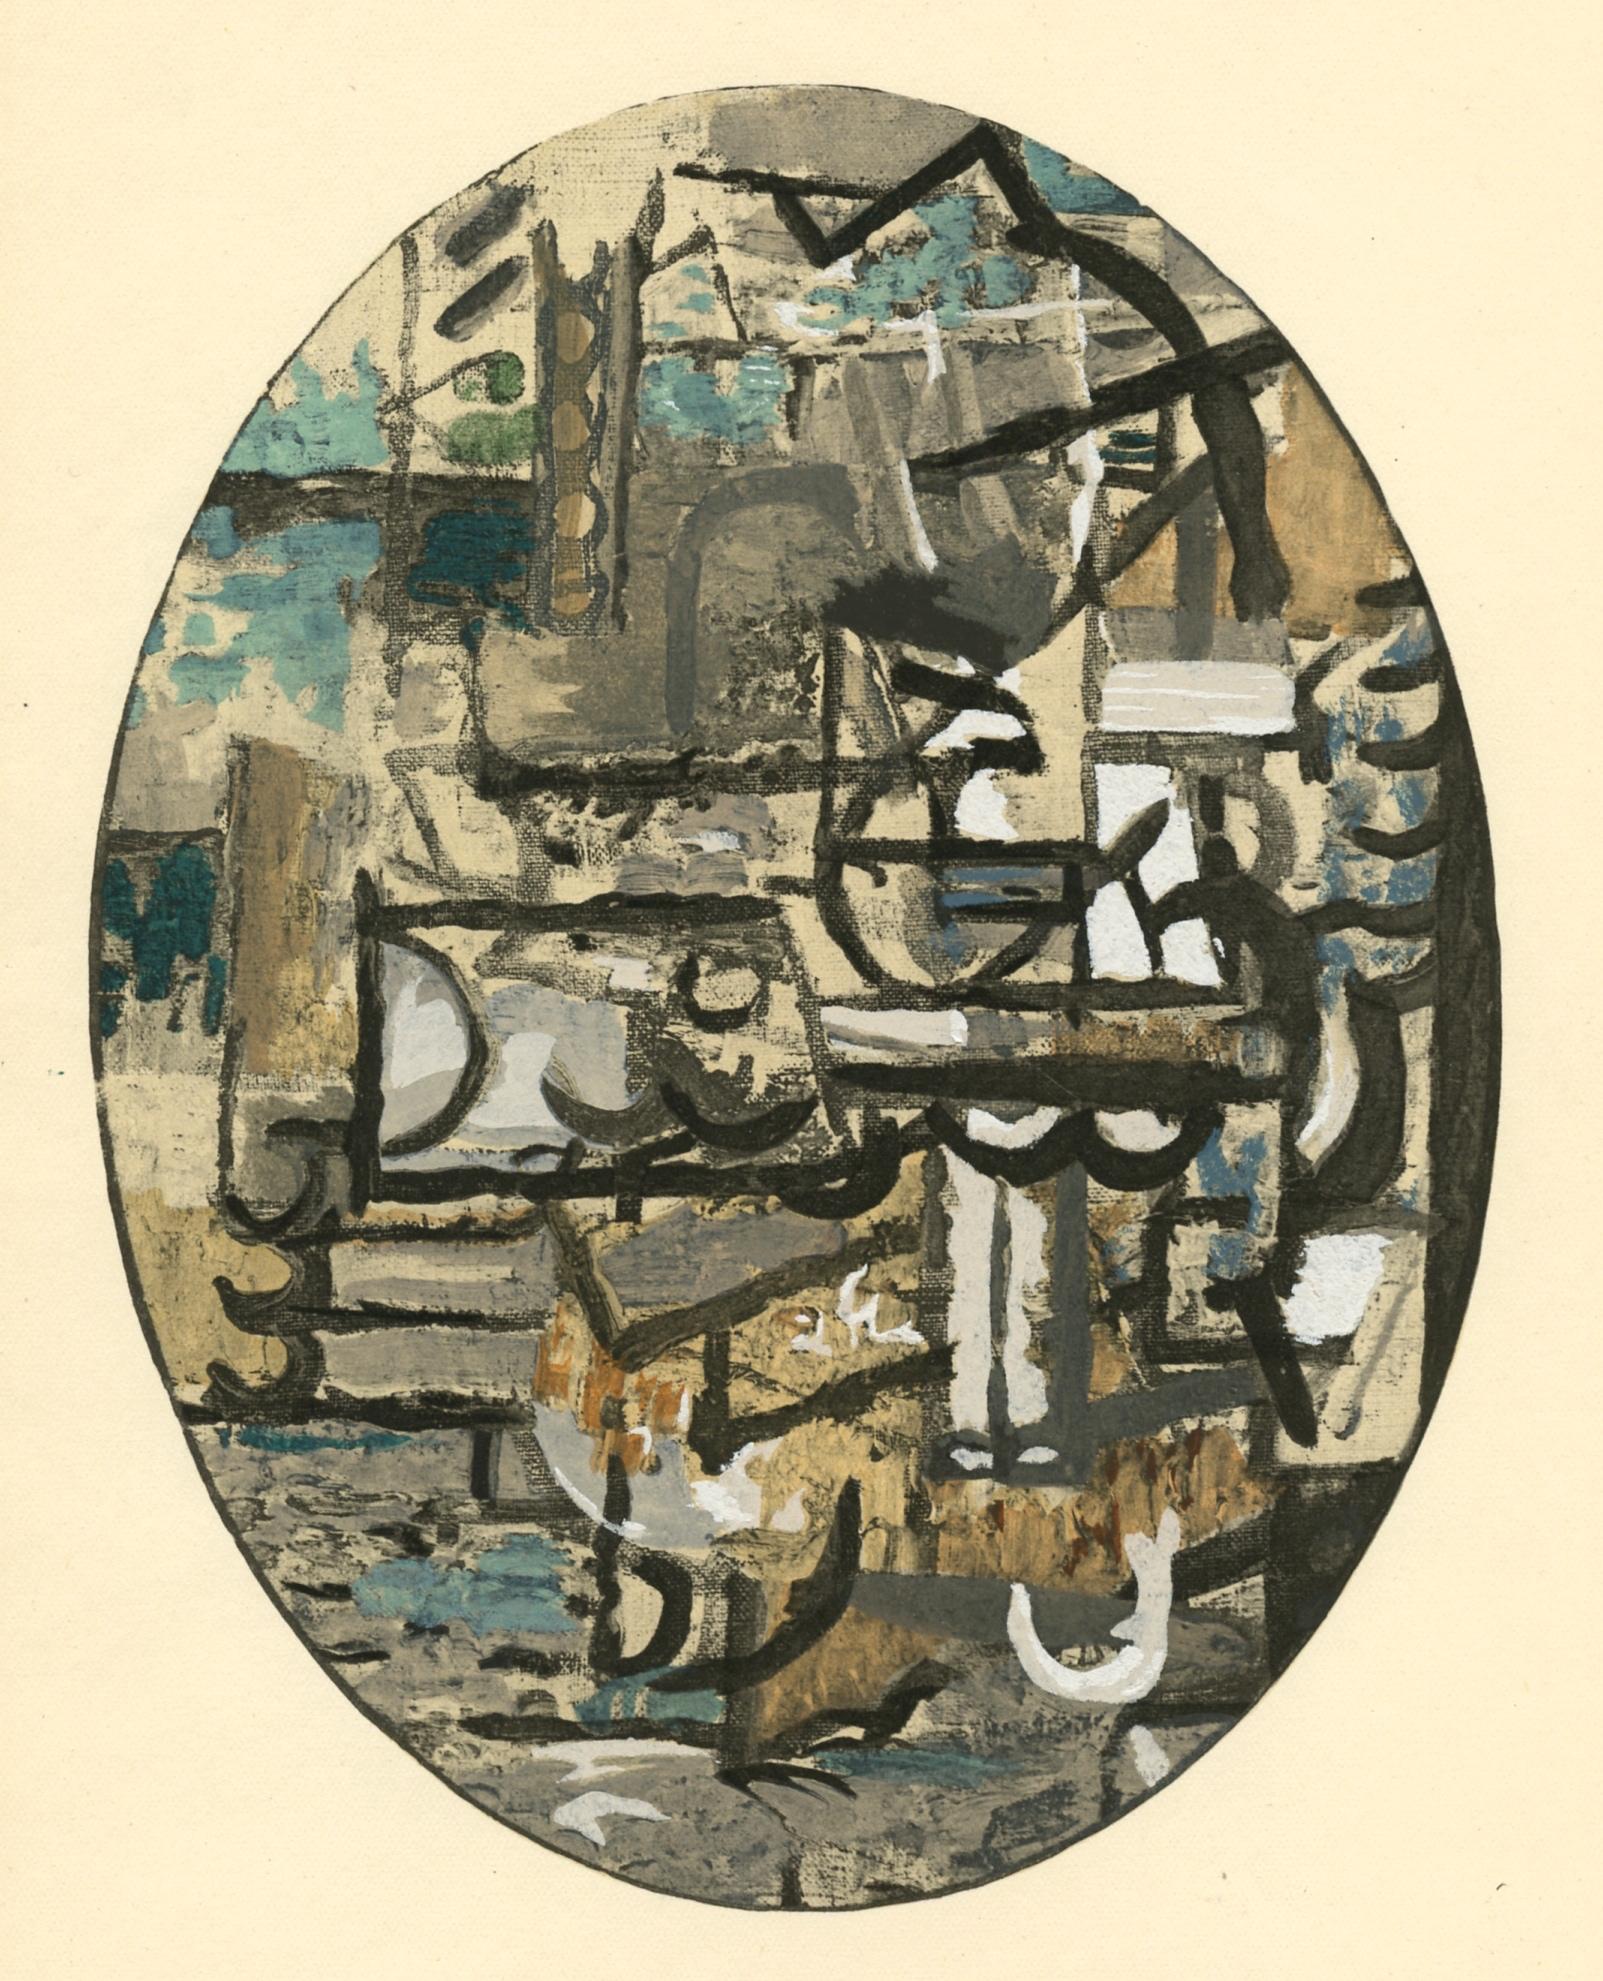 pochoir - Print by (after) Georges Braque